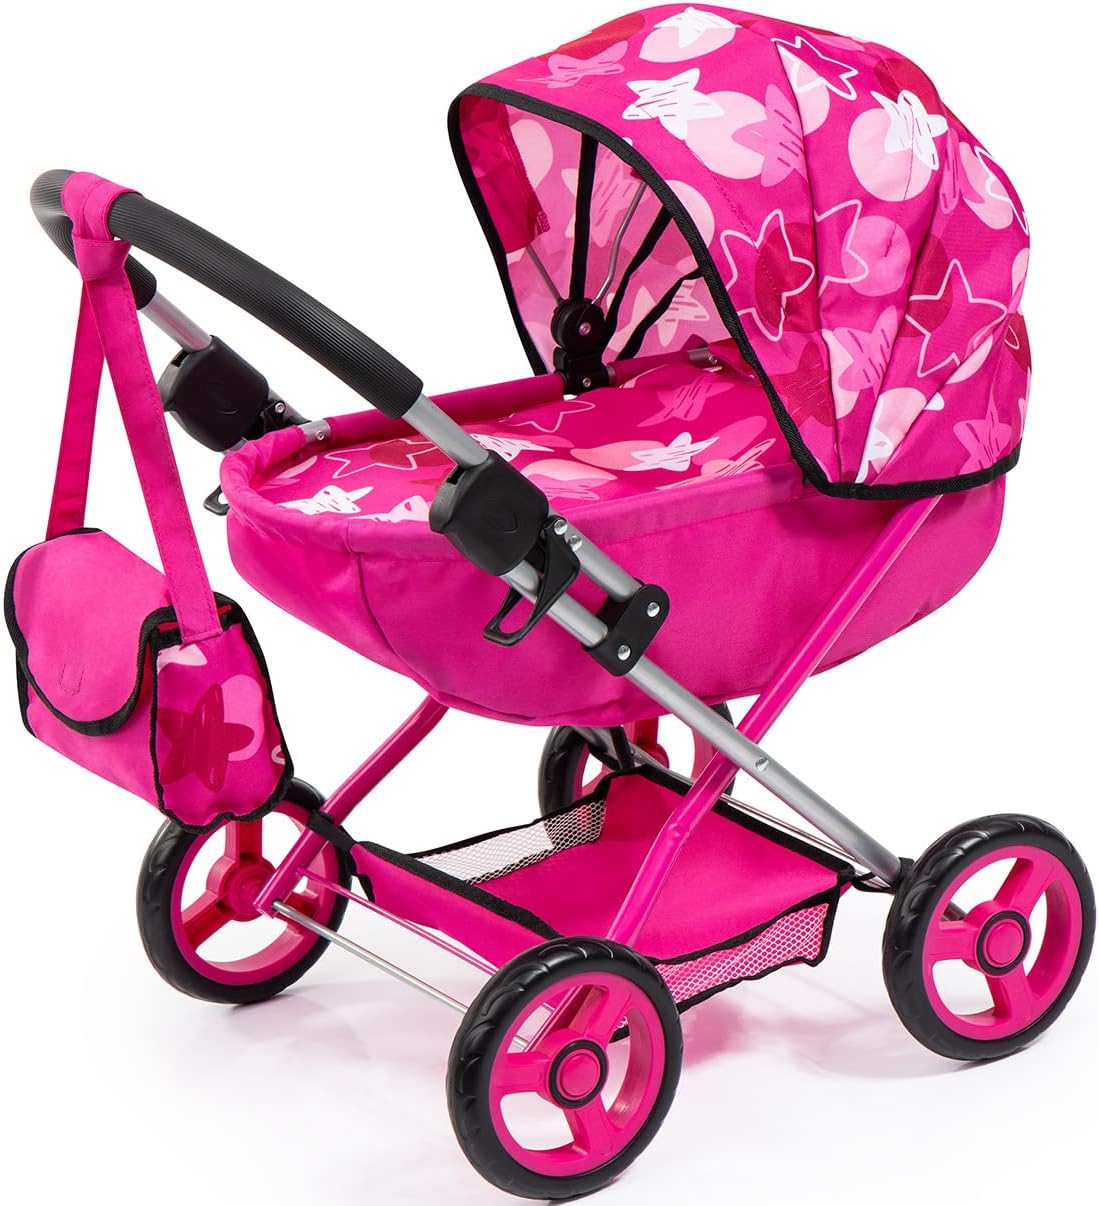 Baby Doll Stroller Pram for Toddlers, Foldable with Bag and Blanket, Modern Pink with Stars - SILBERSHELL